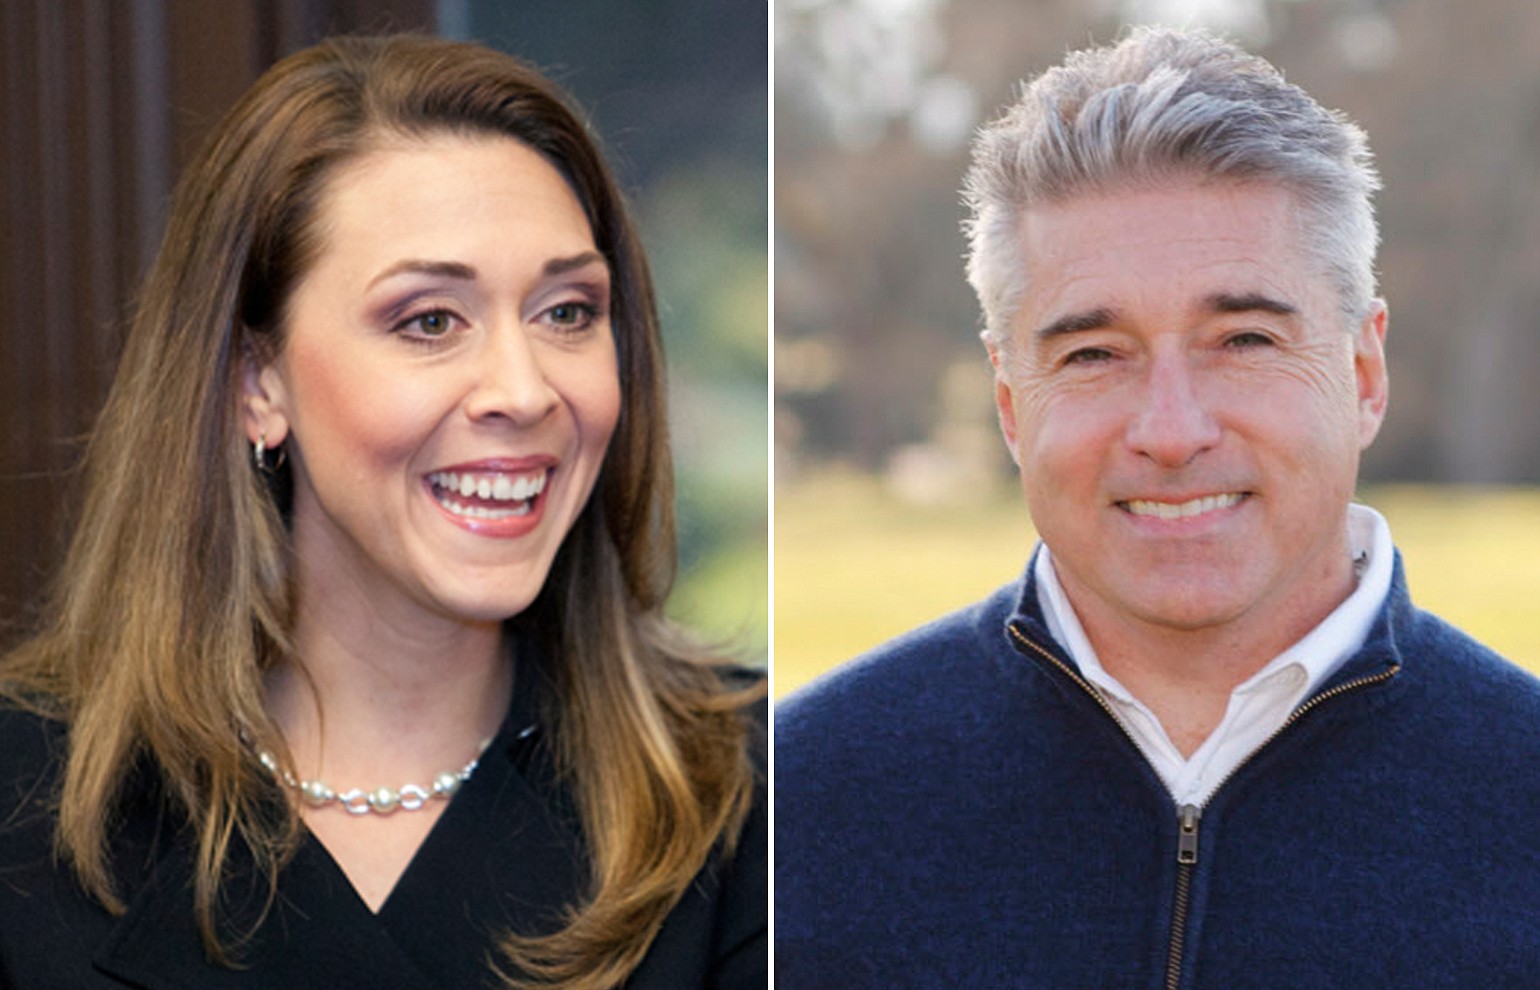 U.S. Rep. Jaime Herrera Beutler, R-Camas, faces a challenge from Bob Dingethal, D-Ridgefield, in the 3rd Congressional District race Nov.